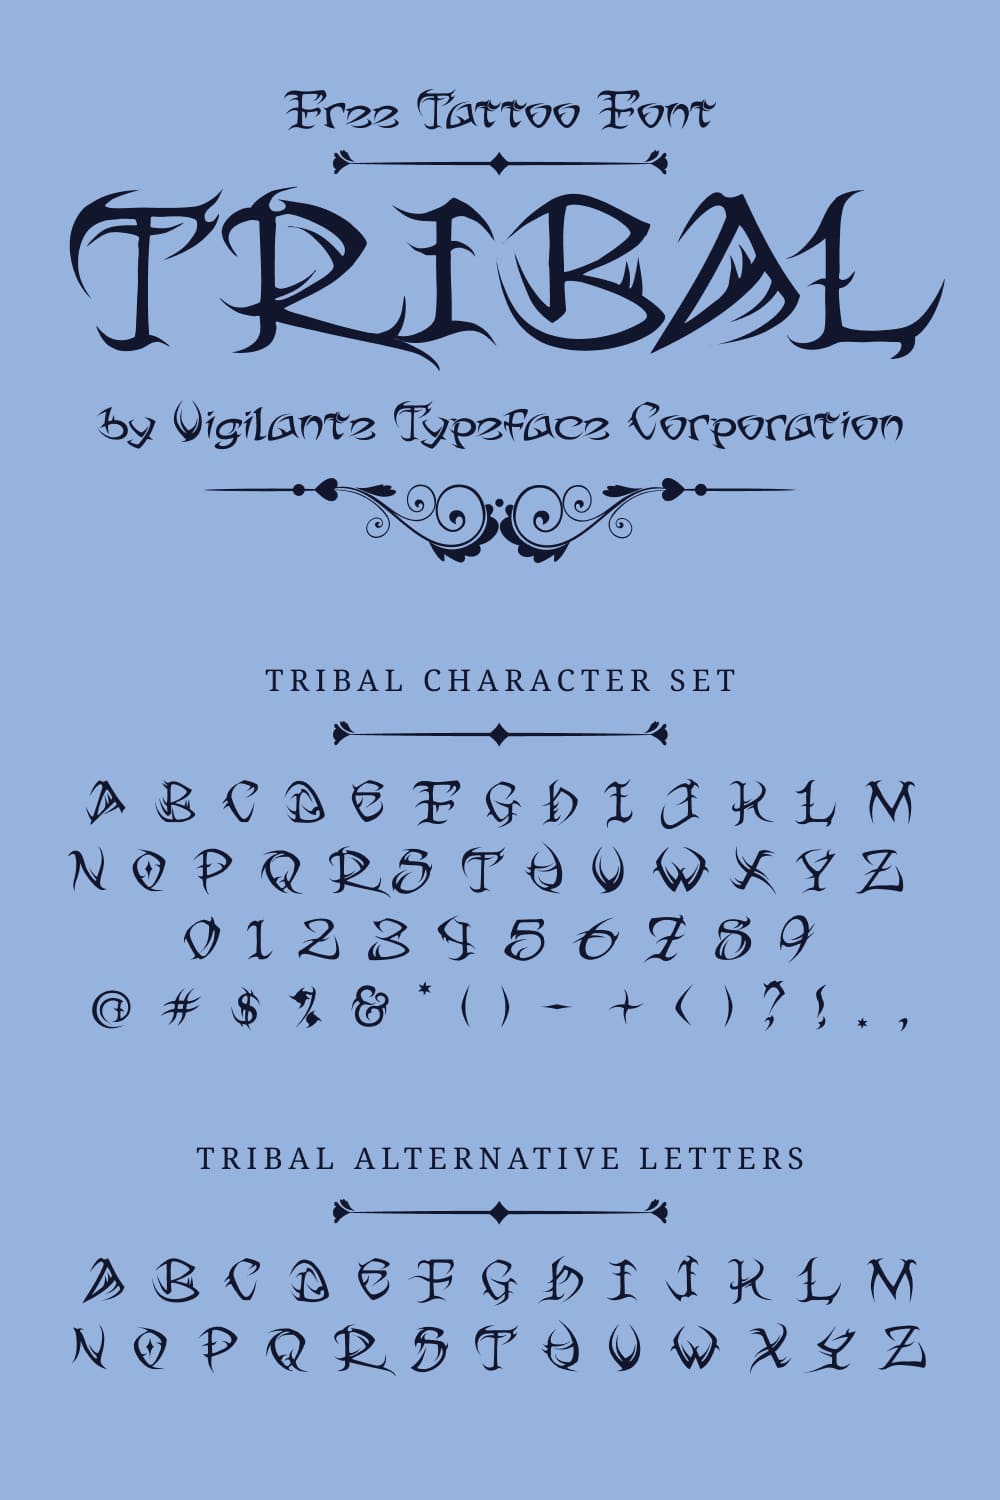 MasterBundles Pinterest Collage Image with Free Tribal Tattoo Font Characters Set.